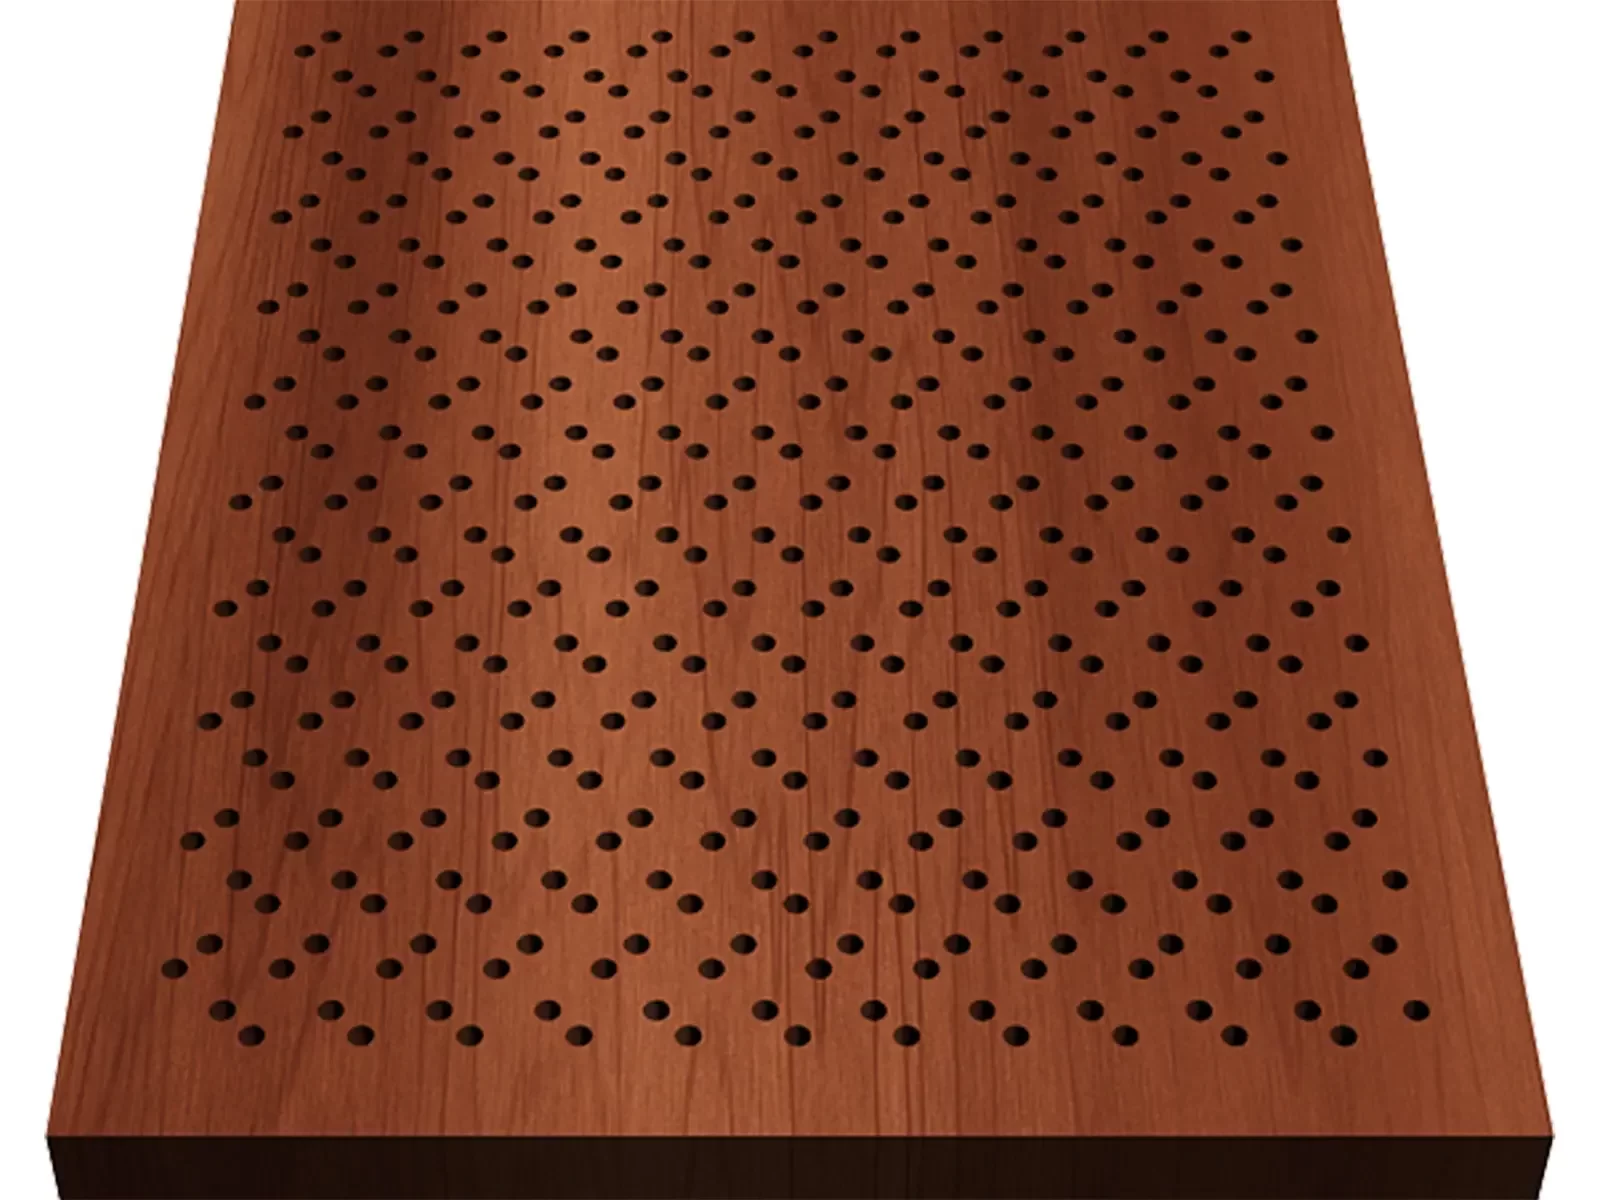 Perfecto Matrix sound absorbing veneered wood panel by RPG Acoustic